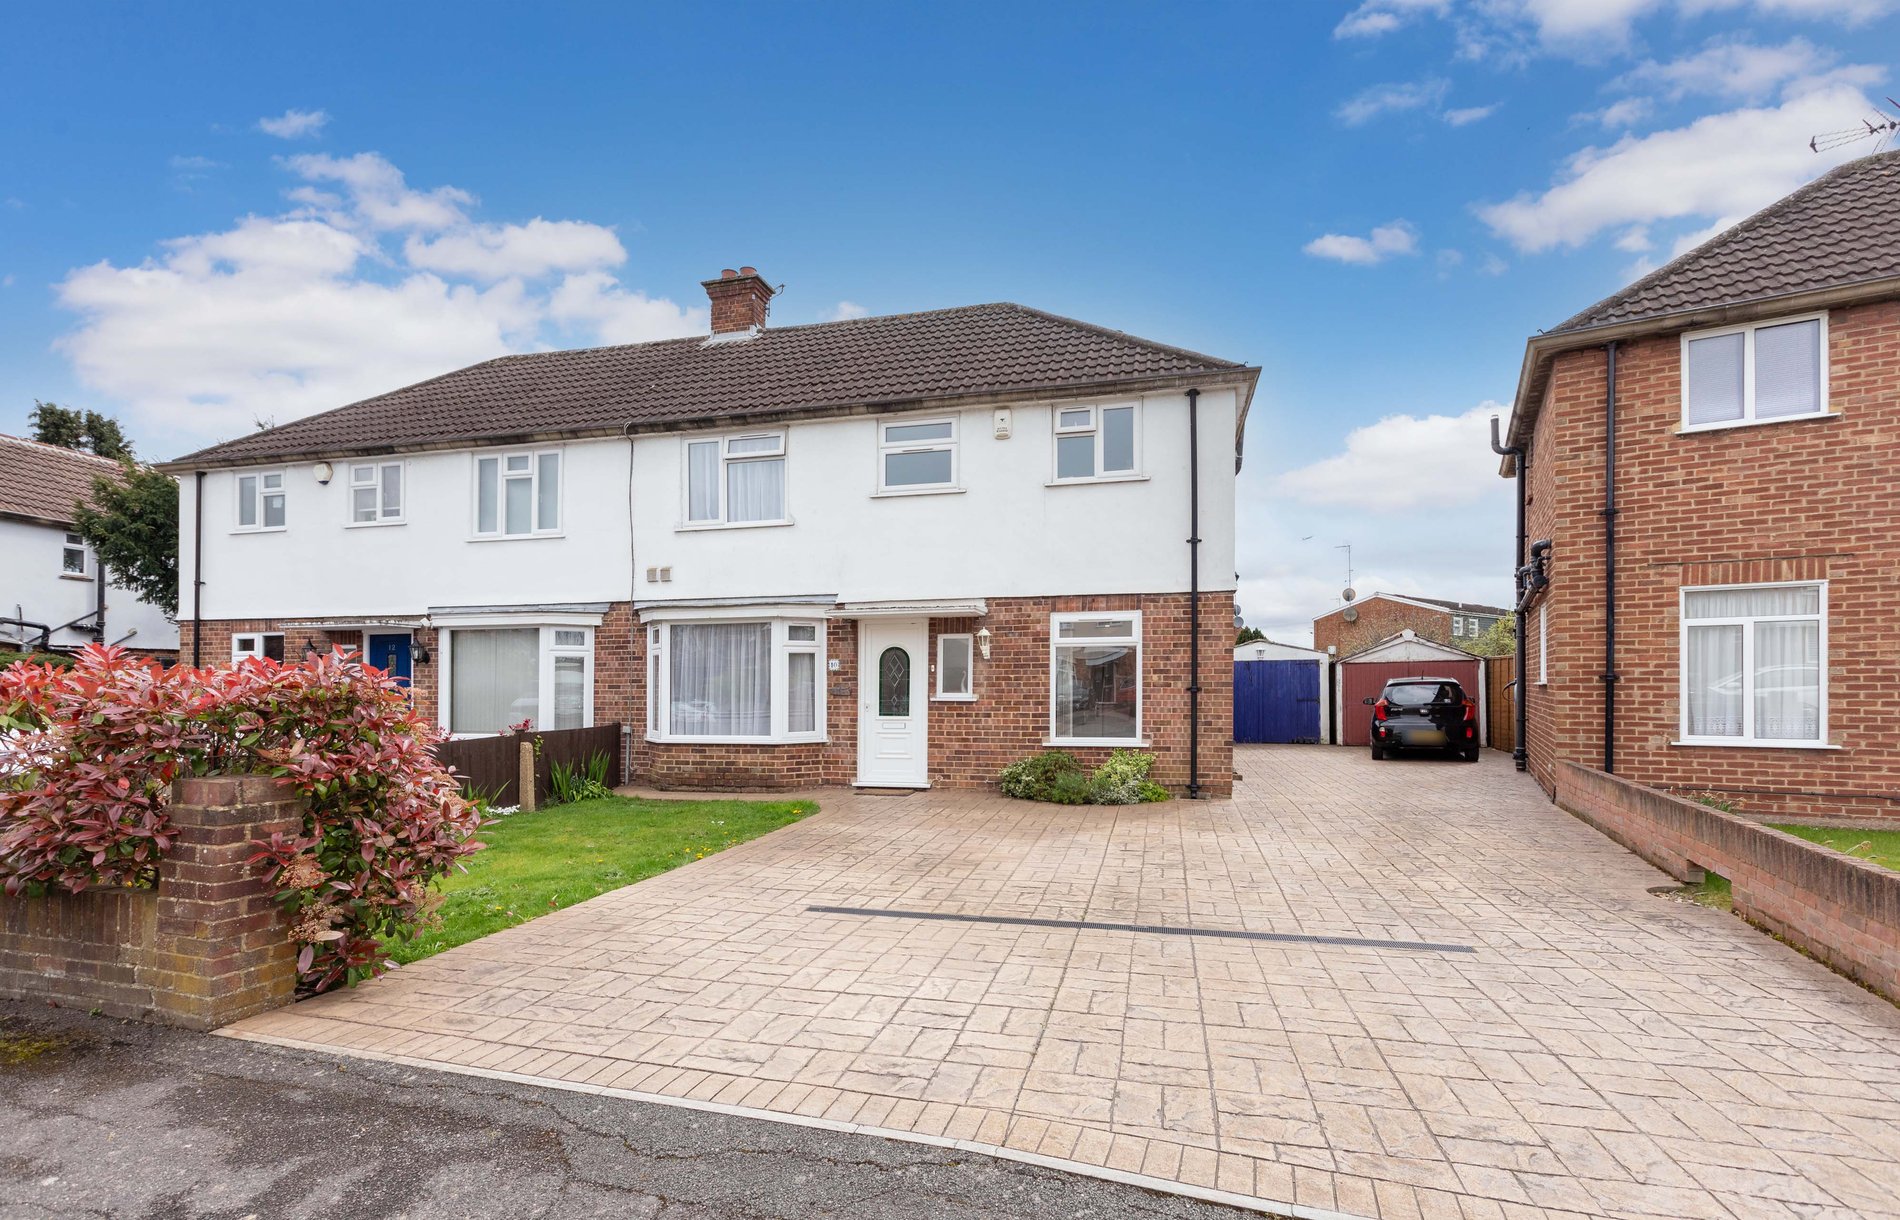 3 bed semi-detached house for sale in Raymond Road, Langley - Property Image 1